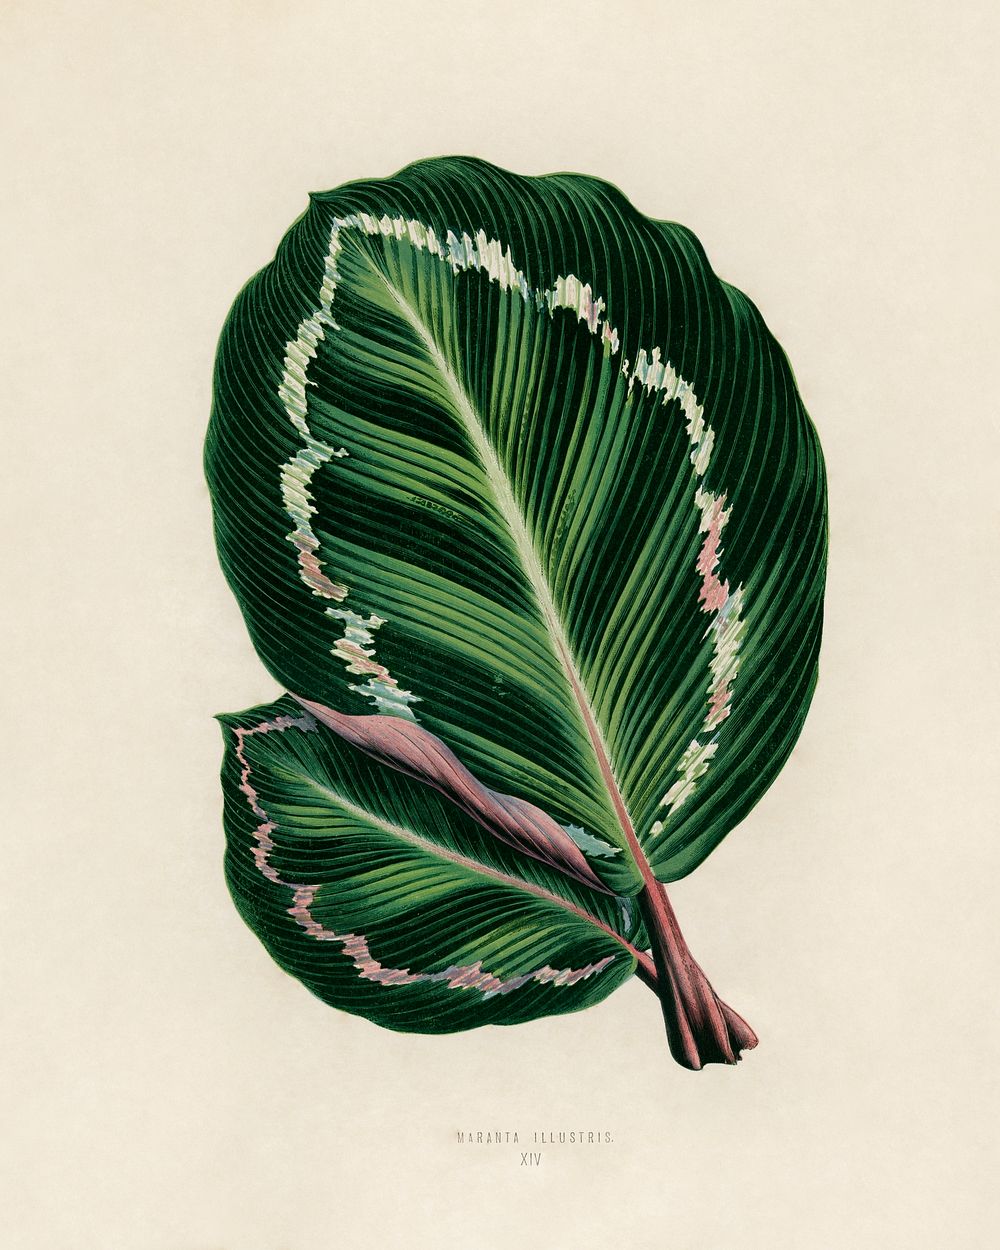 (Maranta illustris). Digitally enhanced from our own 1929 edition of New and Rare Beautiful-Leaved Plants by Benjamin…